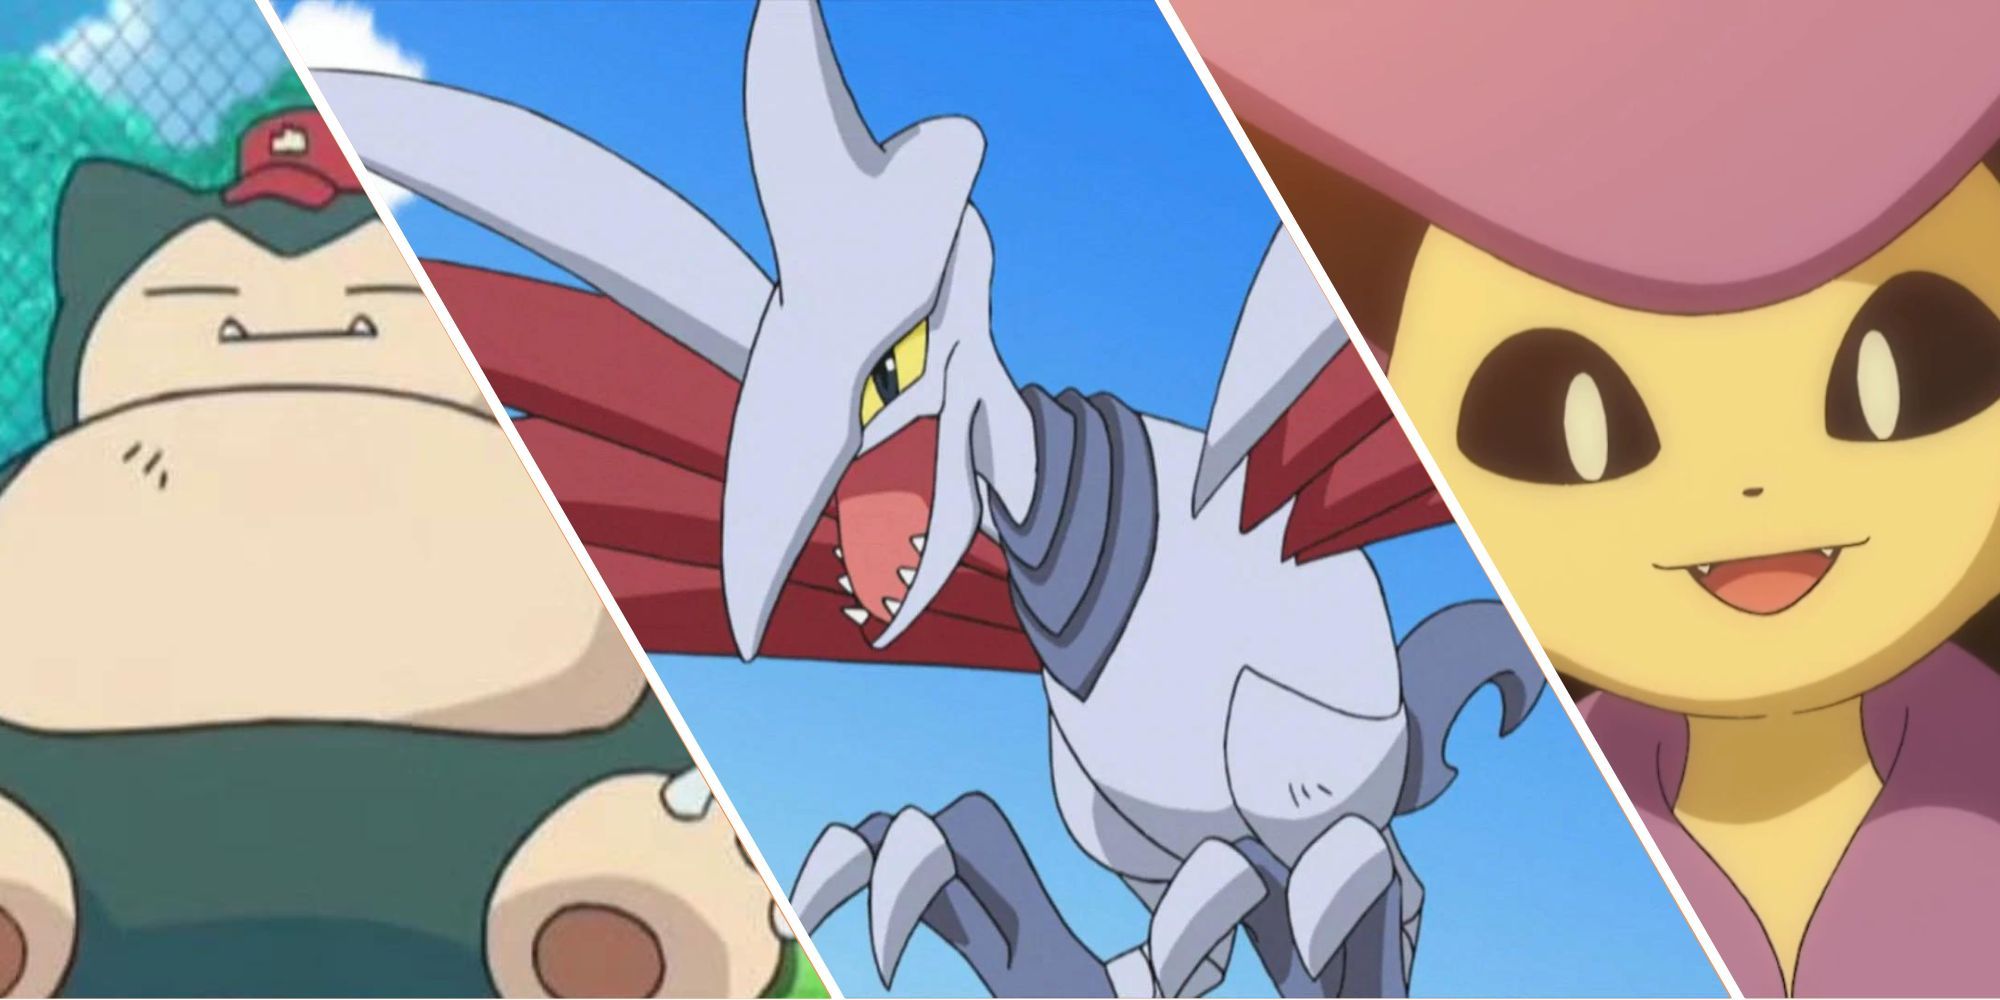 Split image of Snorlax, Skarmory, and Delcatty in the Pokémon Anime. 